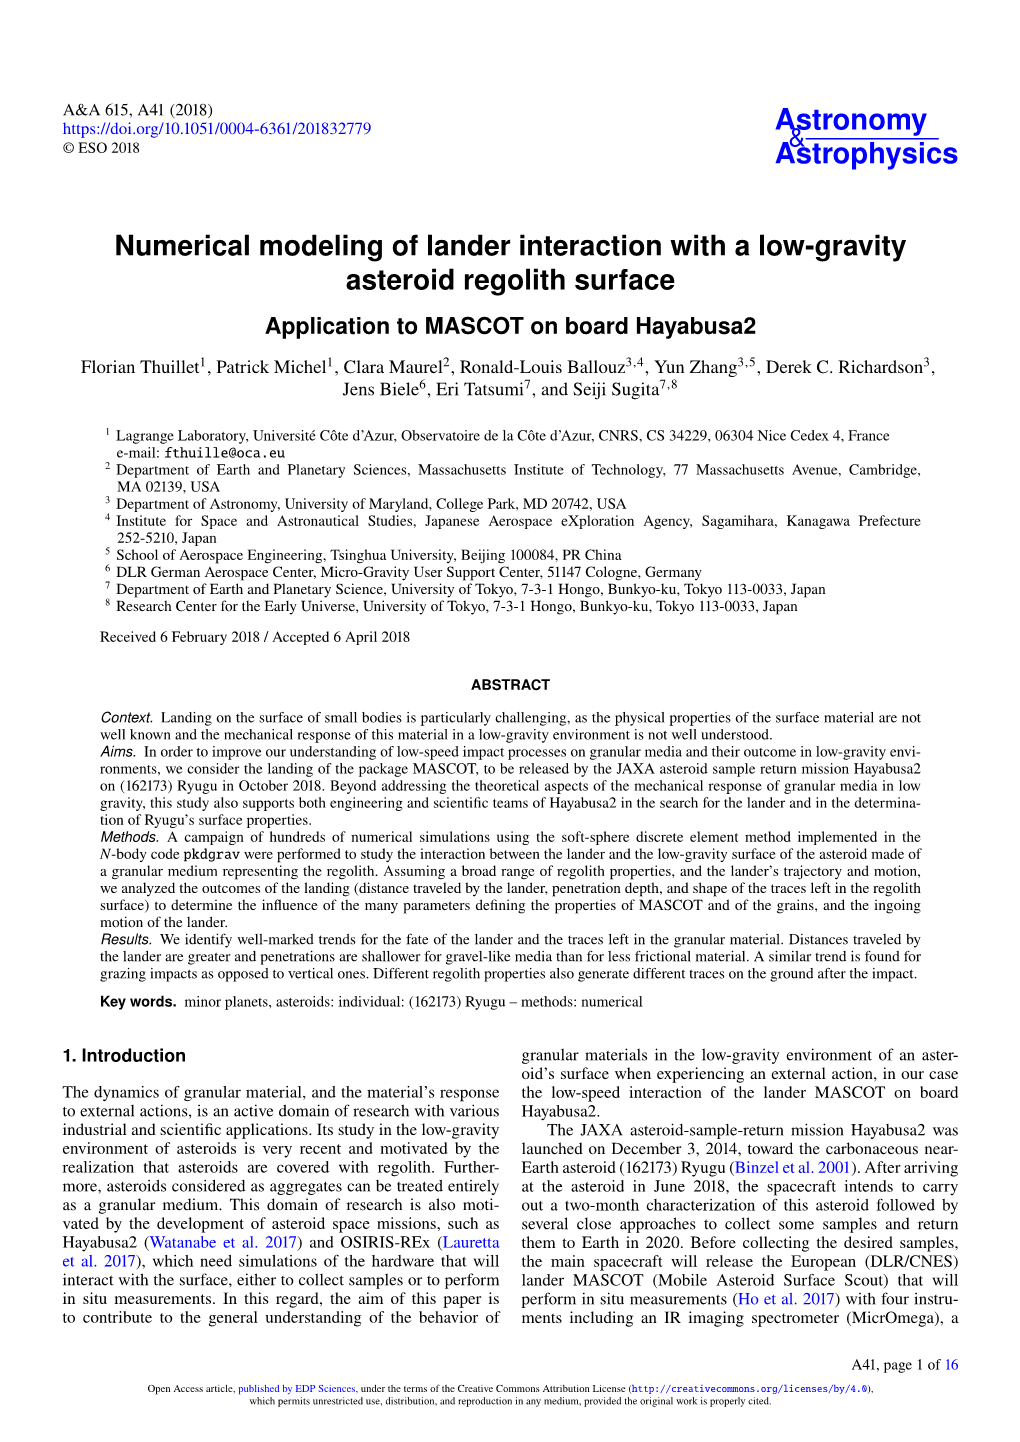 Numerical Modeling of Lander Interaction with a Low-Gravity